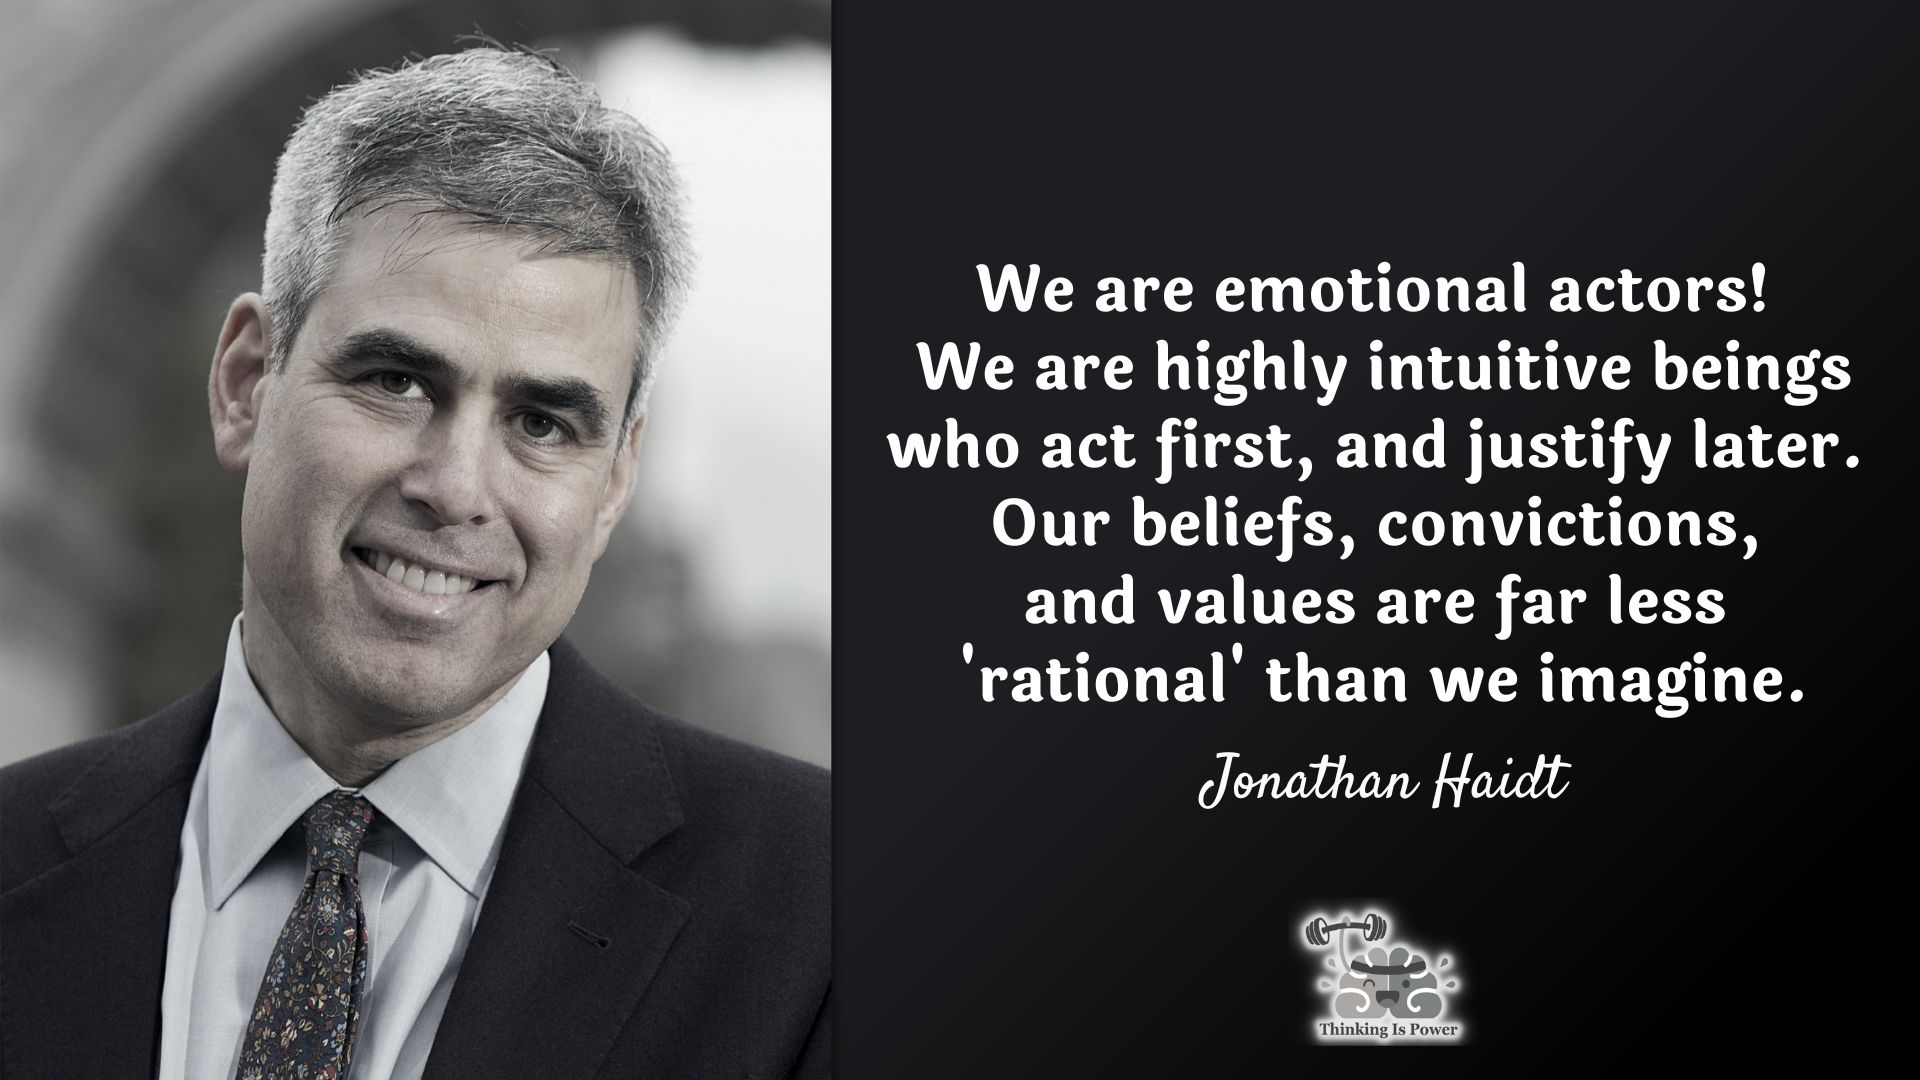 Jonathan Haidt quote. We are emotional actors! We are highly intuitive beings who act first, and justify later. Our beliefs, convictions, and values are far less rational than we imagine.